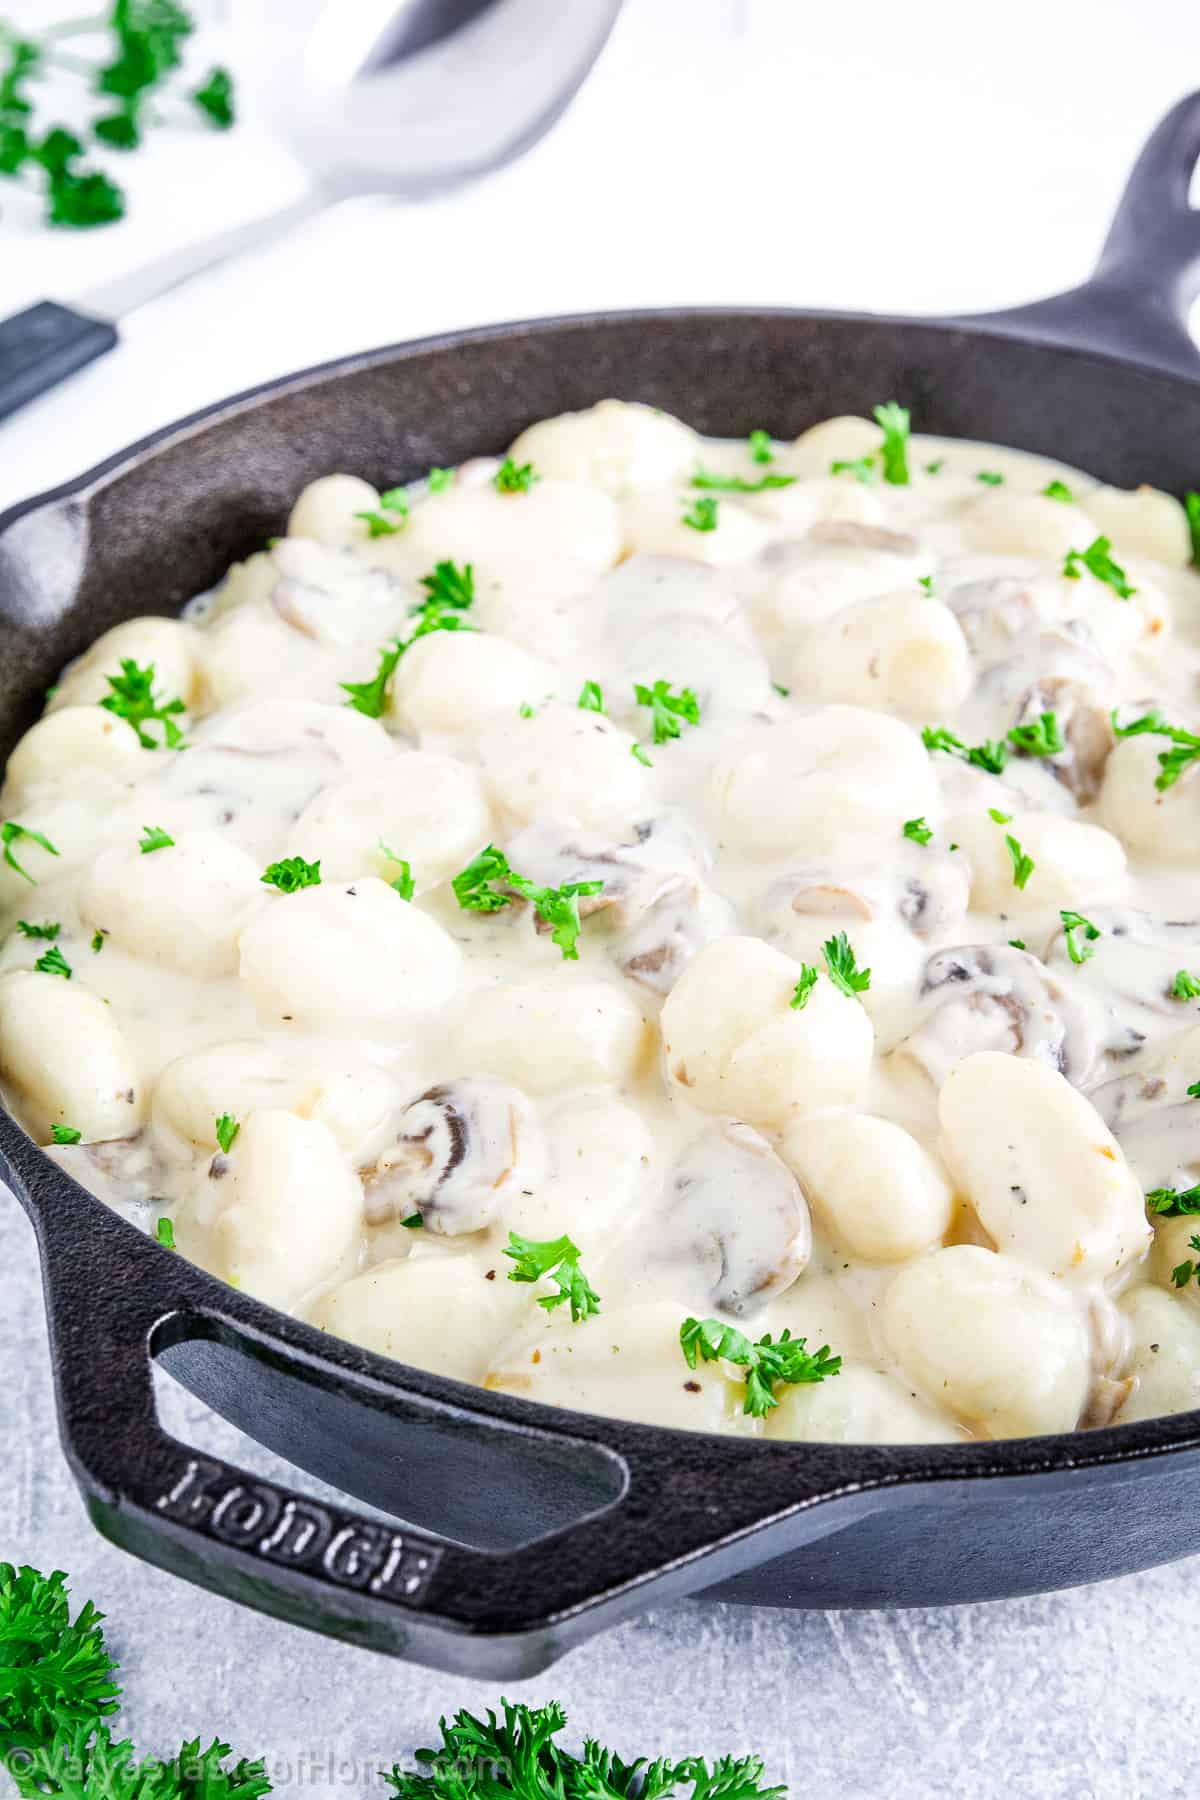 This mushroom gnocchi recipe is a satisfying blend of creamy, savory, and slightly herby flavors that's ready in under 30 minutes.